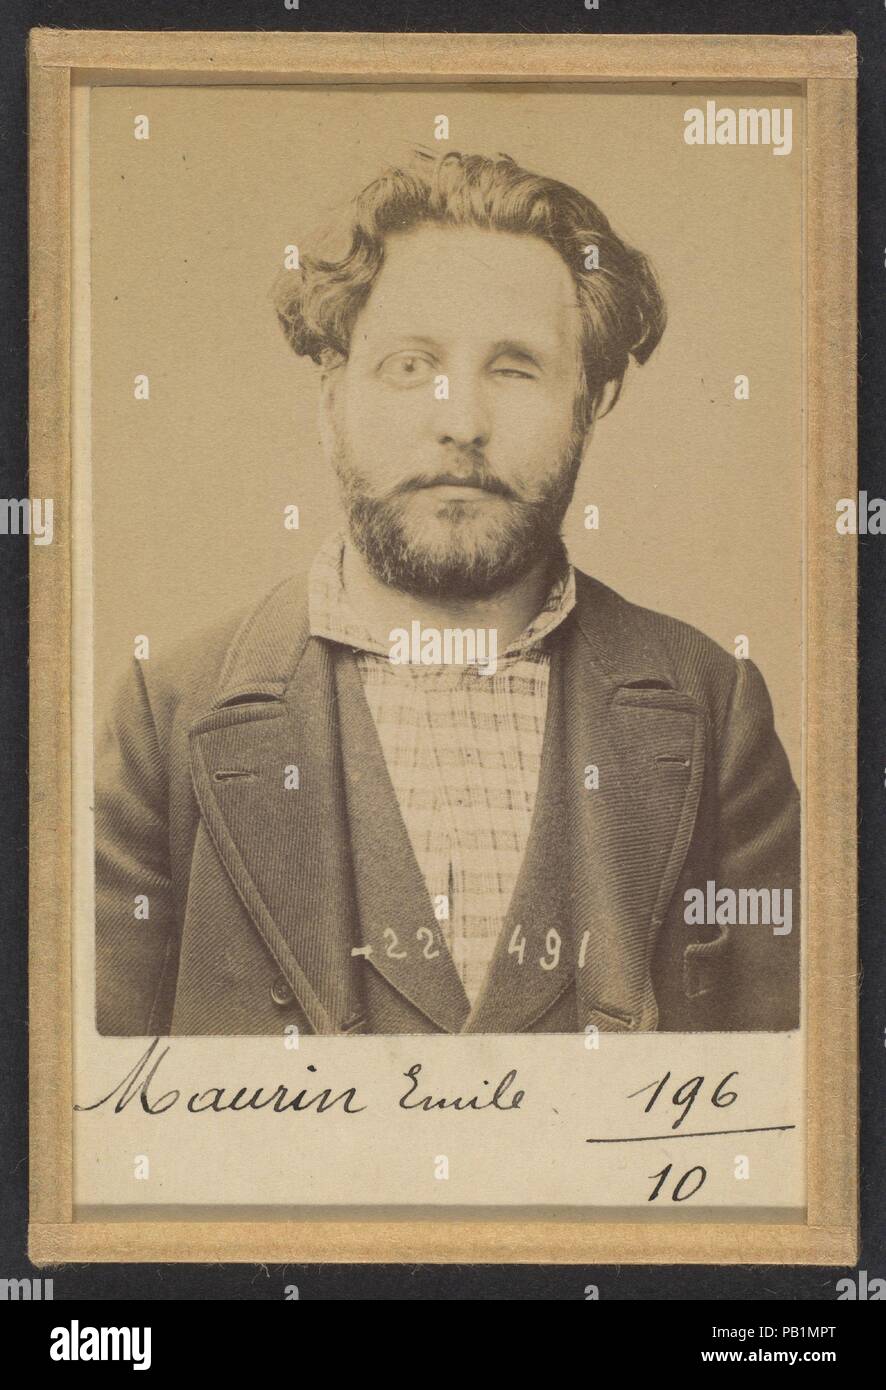 Maurin. Émile, Auguste. 31 ans, né à Marseille (Bouche du Rhône). Ex photographe. Anarchiste. 2/7/94. Artist: Alphonse Bertillon (French, 1853-1914). Dimensions: 10.5 x 7 x 0.5 cm (4 1/8 x 2 3/4 x 3/16 in.) each. Date: 1894.  Born into a distinguished family of scientists and statisticians, Bertillon began his career as a clerk in the Identification Bureau of the Paris Prefecture of Police in 1879. Tasked with maintaining reliable police records of offenders, he developed the first modern system of criminal identification. The system, which became known as Bertillonage, had three components: a Stock Photo